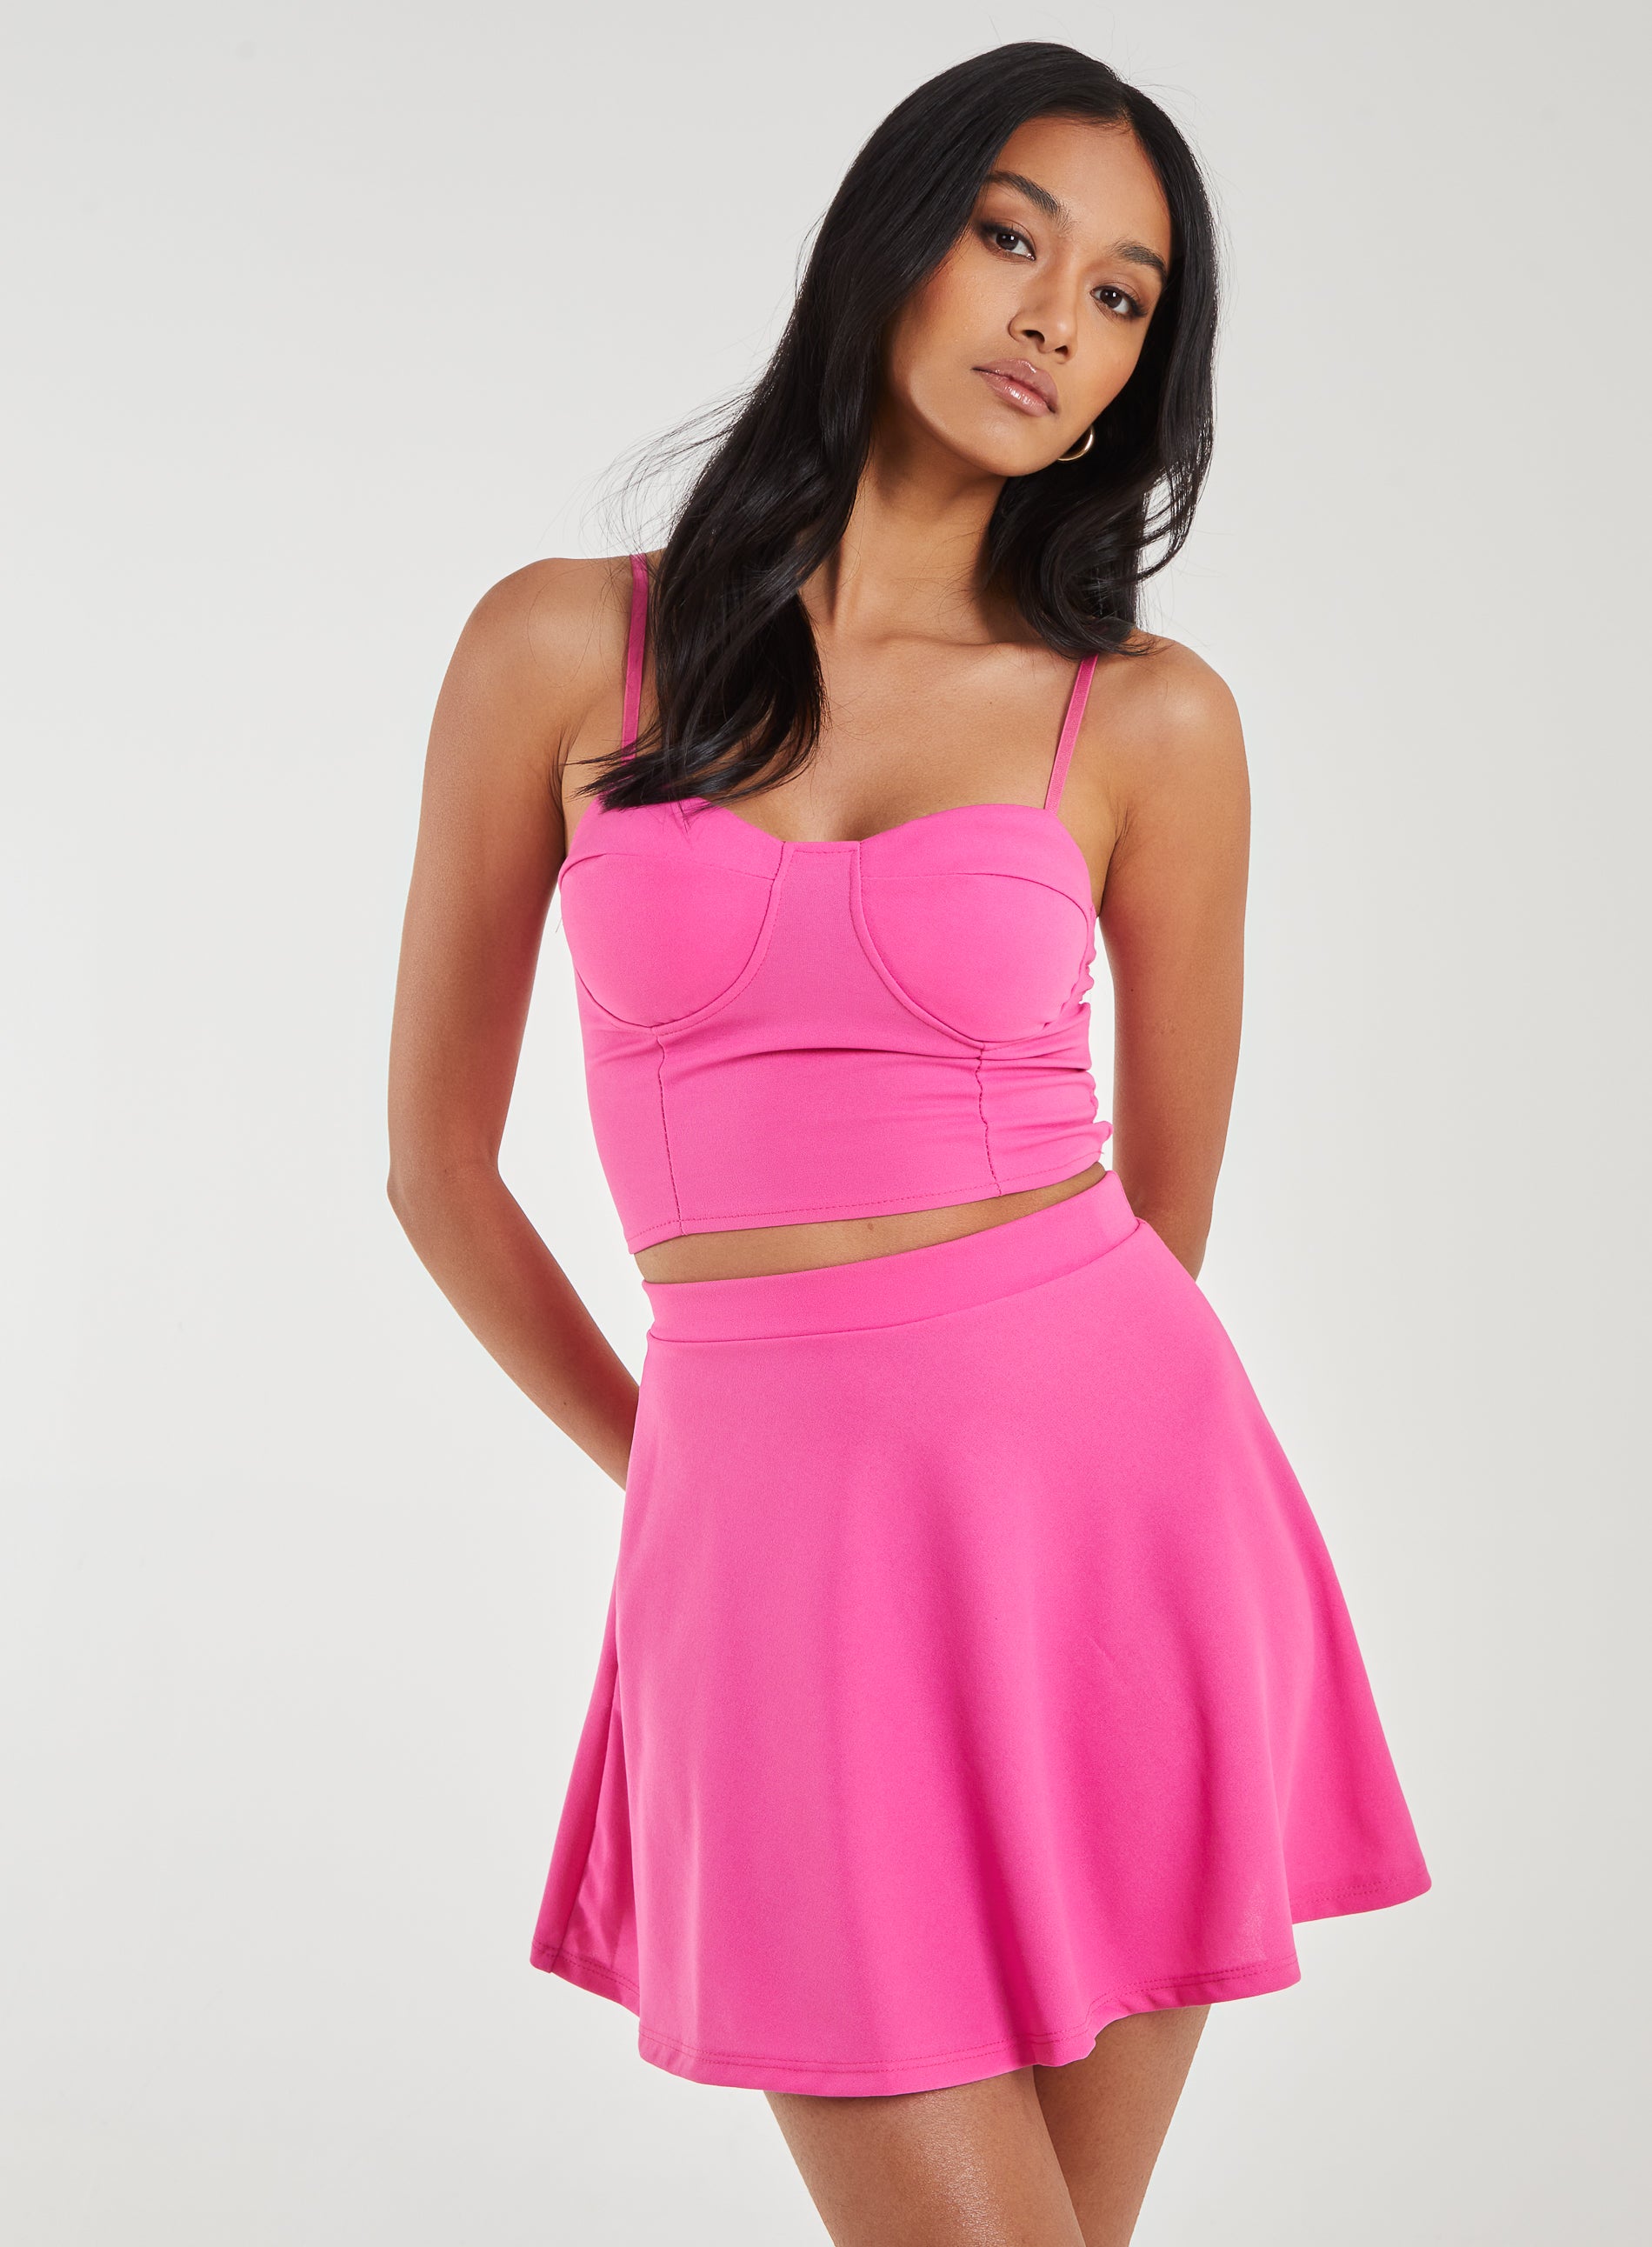 Basic Bustier Cropped Top  - L  - Hot Pink